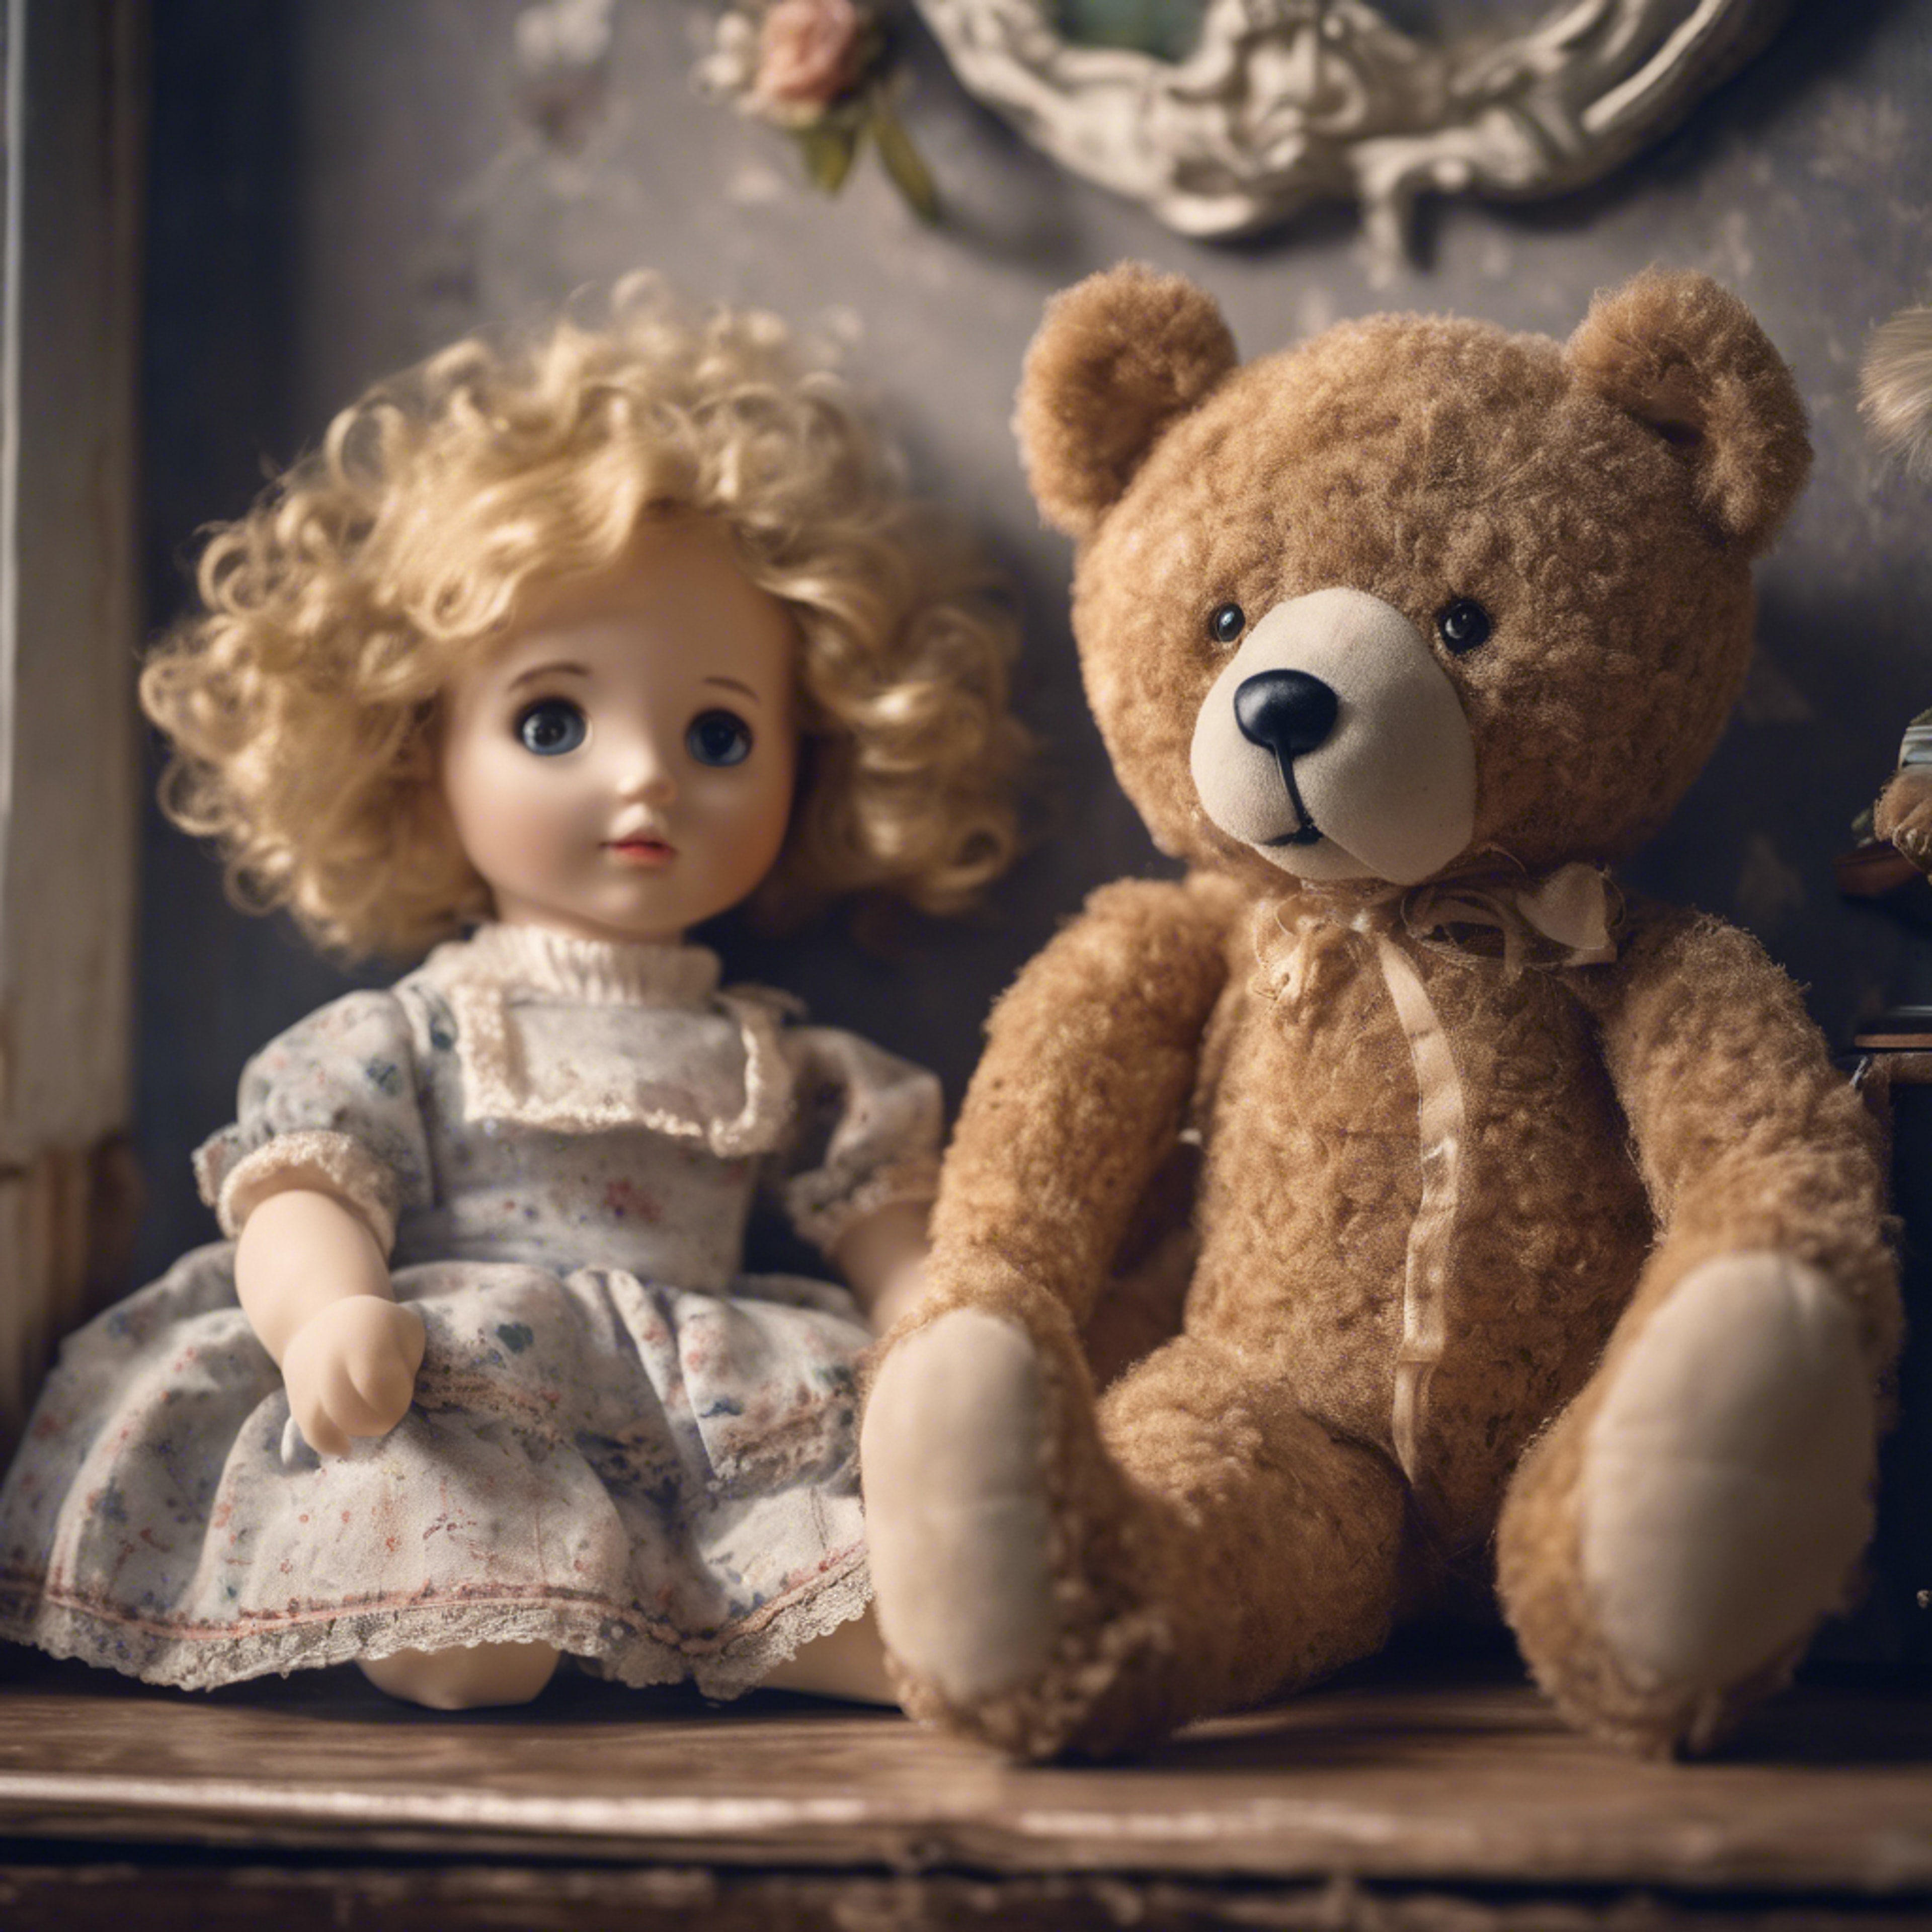 A stuffed teddy bear next to a porcelain doll in an old-fashioned child's room. Kertas dinding[4cda63de3c9241699390]